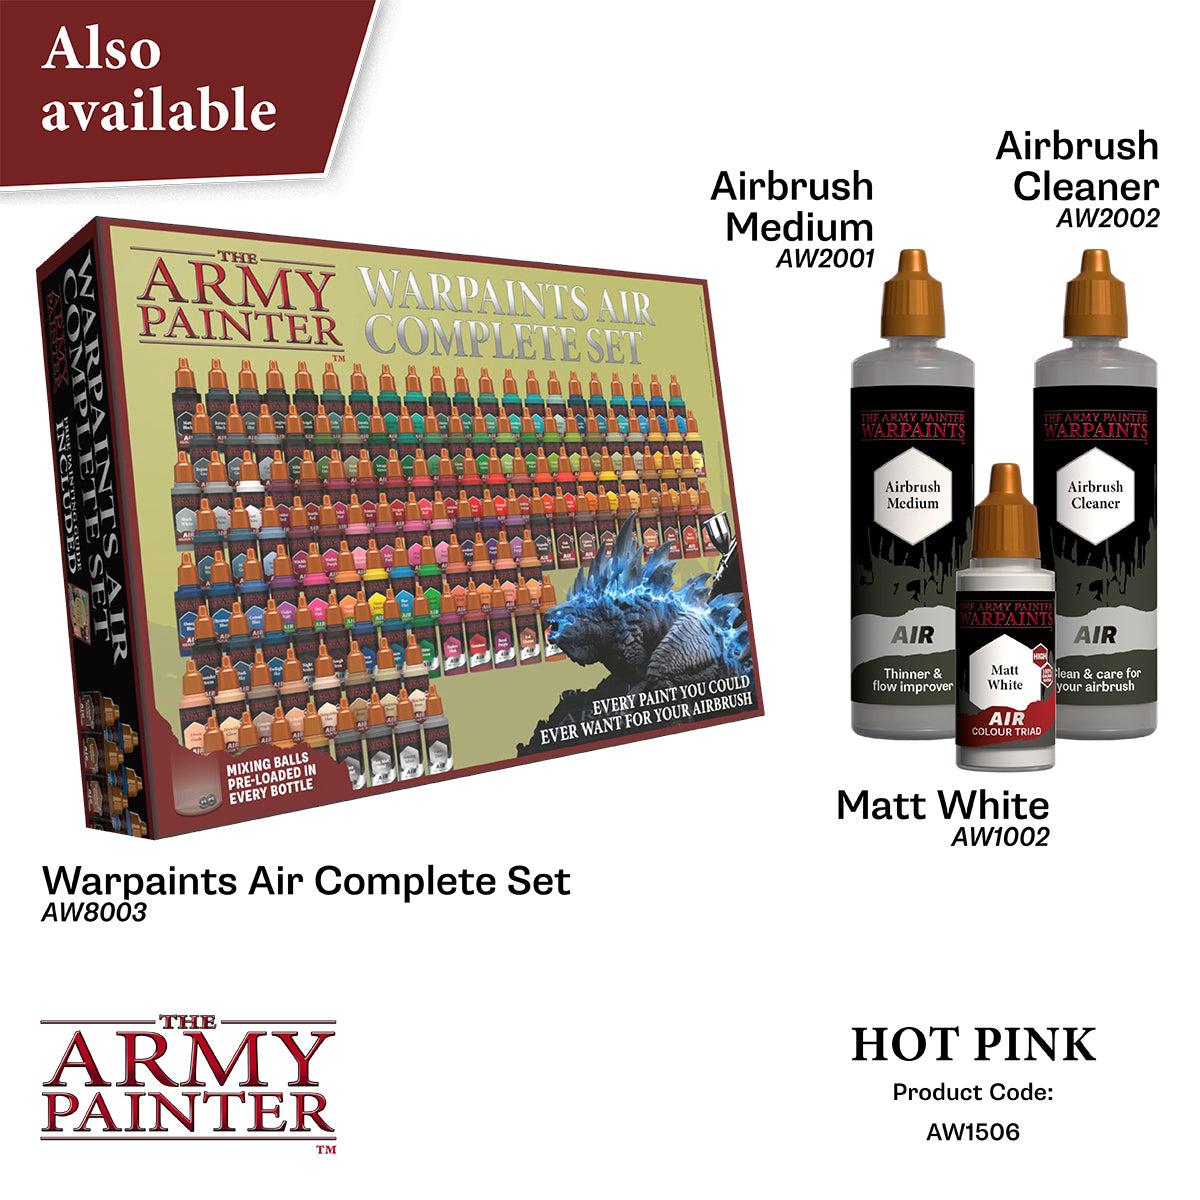 The Army Painter Warpaints Air: the new range of colors for airbrushes